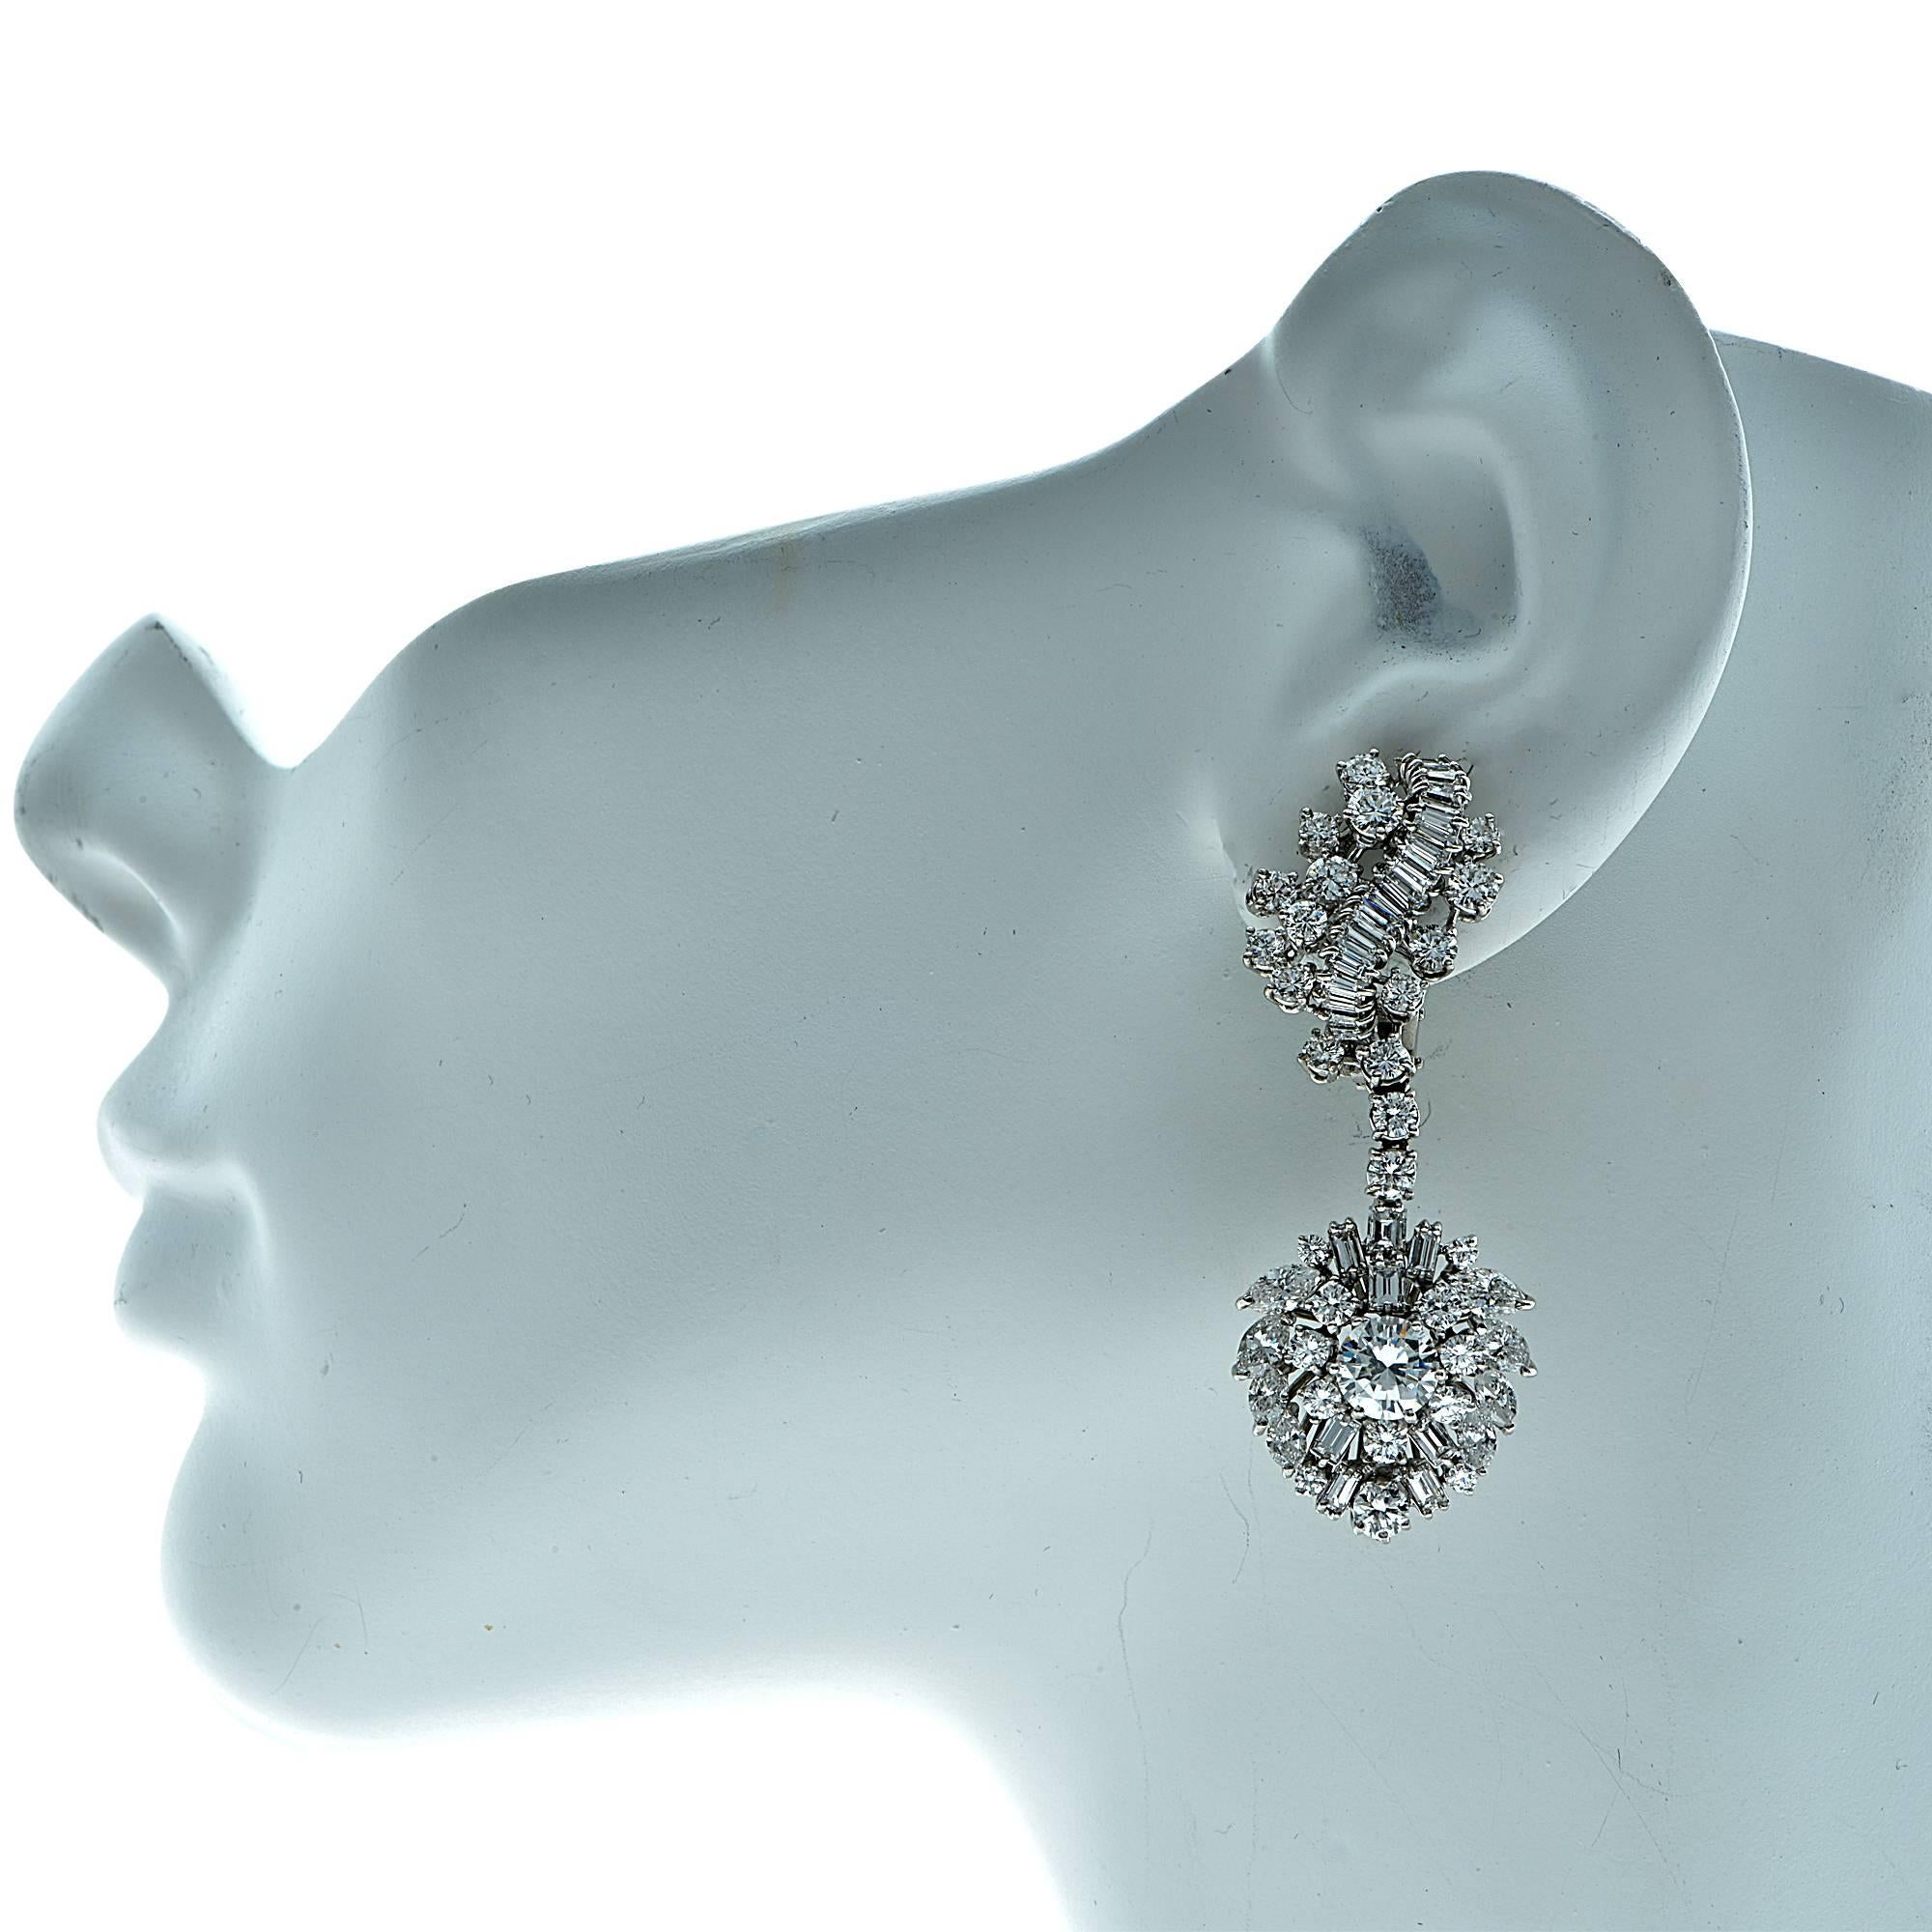 Platinum dangle earrings featuring 2 round brilliant cut diamonds weighing approximately 1.87cts total G-H color SI-I1 clarity accented by 124 round, baguette and marquise cut diamonds weighing approximately 10.30cts total G color VS